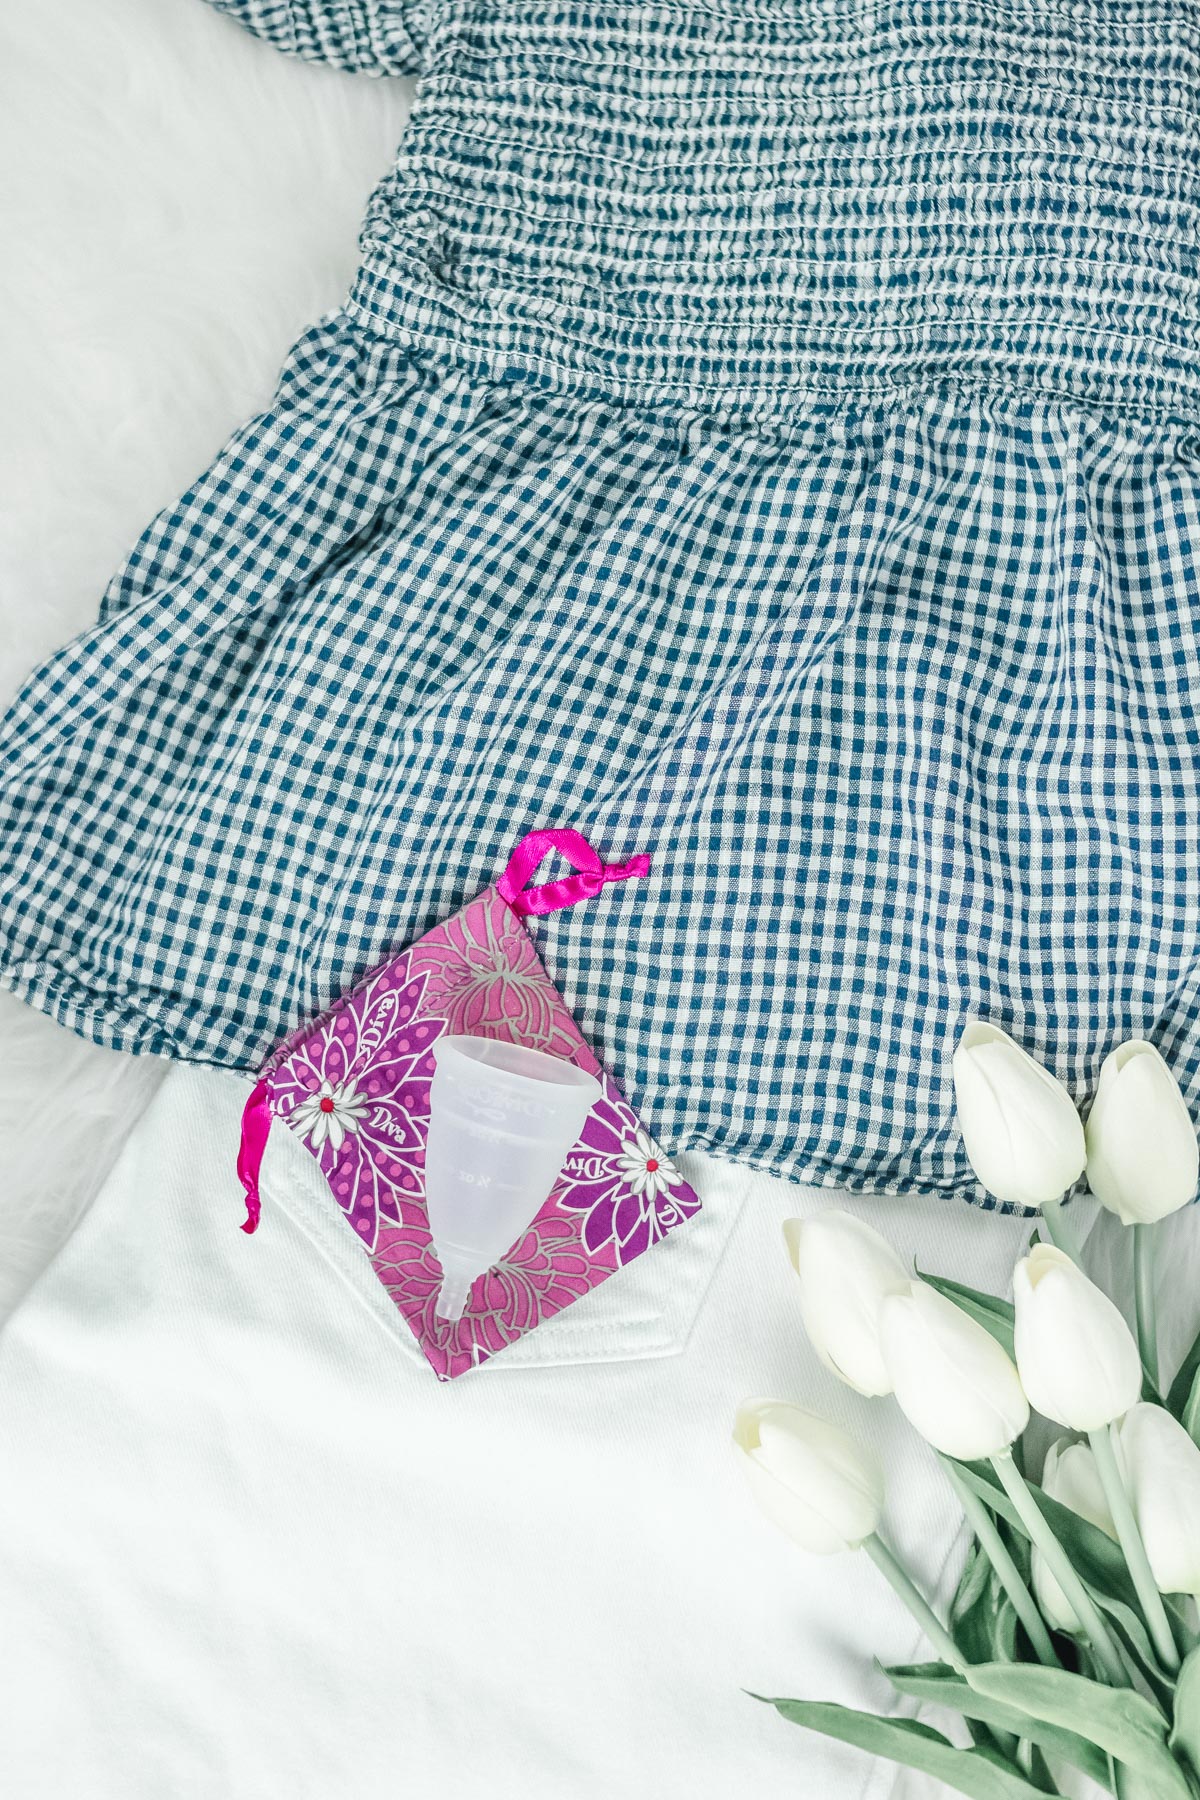 white jeans and gingham top with DivaCup menstrual cup